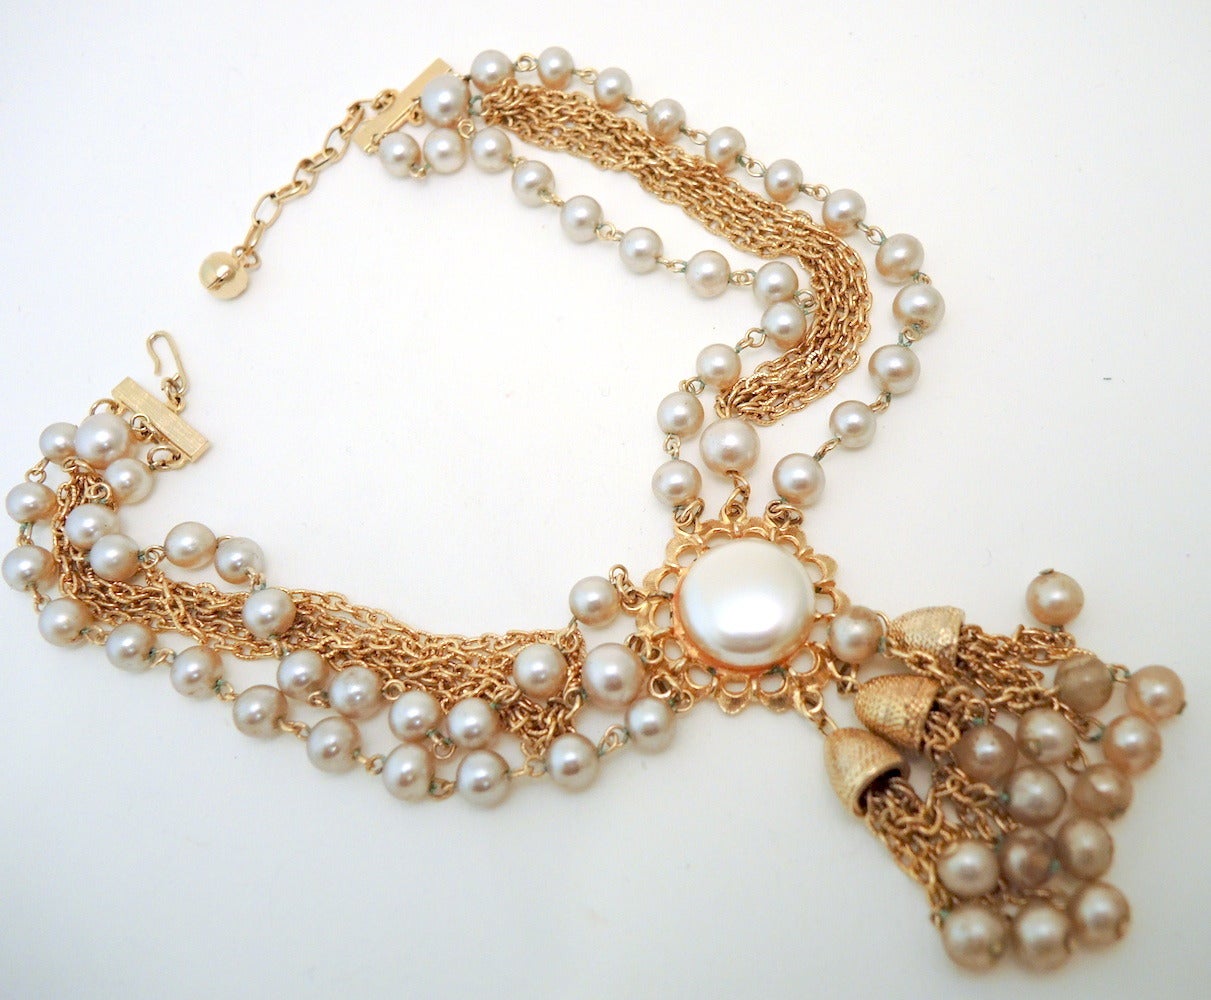 This vintage necklace features faux pearls in a gold-tone setting.  The necklace has two strands of faux pearls and 5 strands of link chain.    In excellent condition, this necklace measures 16 1/2” with a hook closure; the pendant is 3” x 1 1/4”